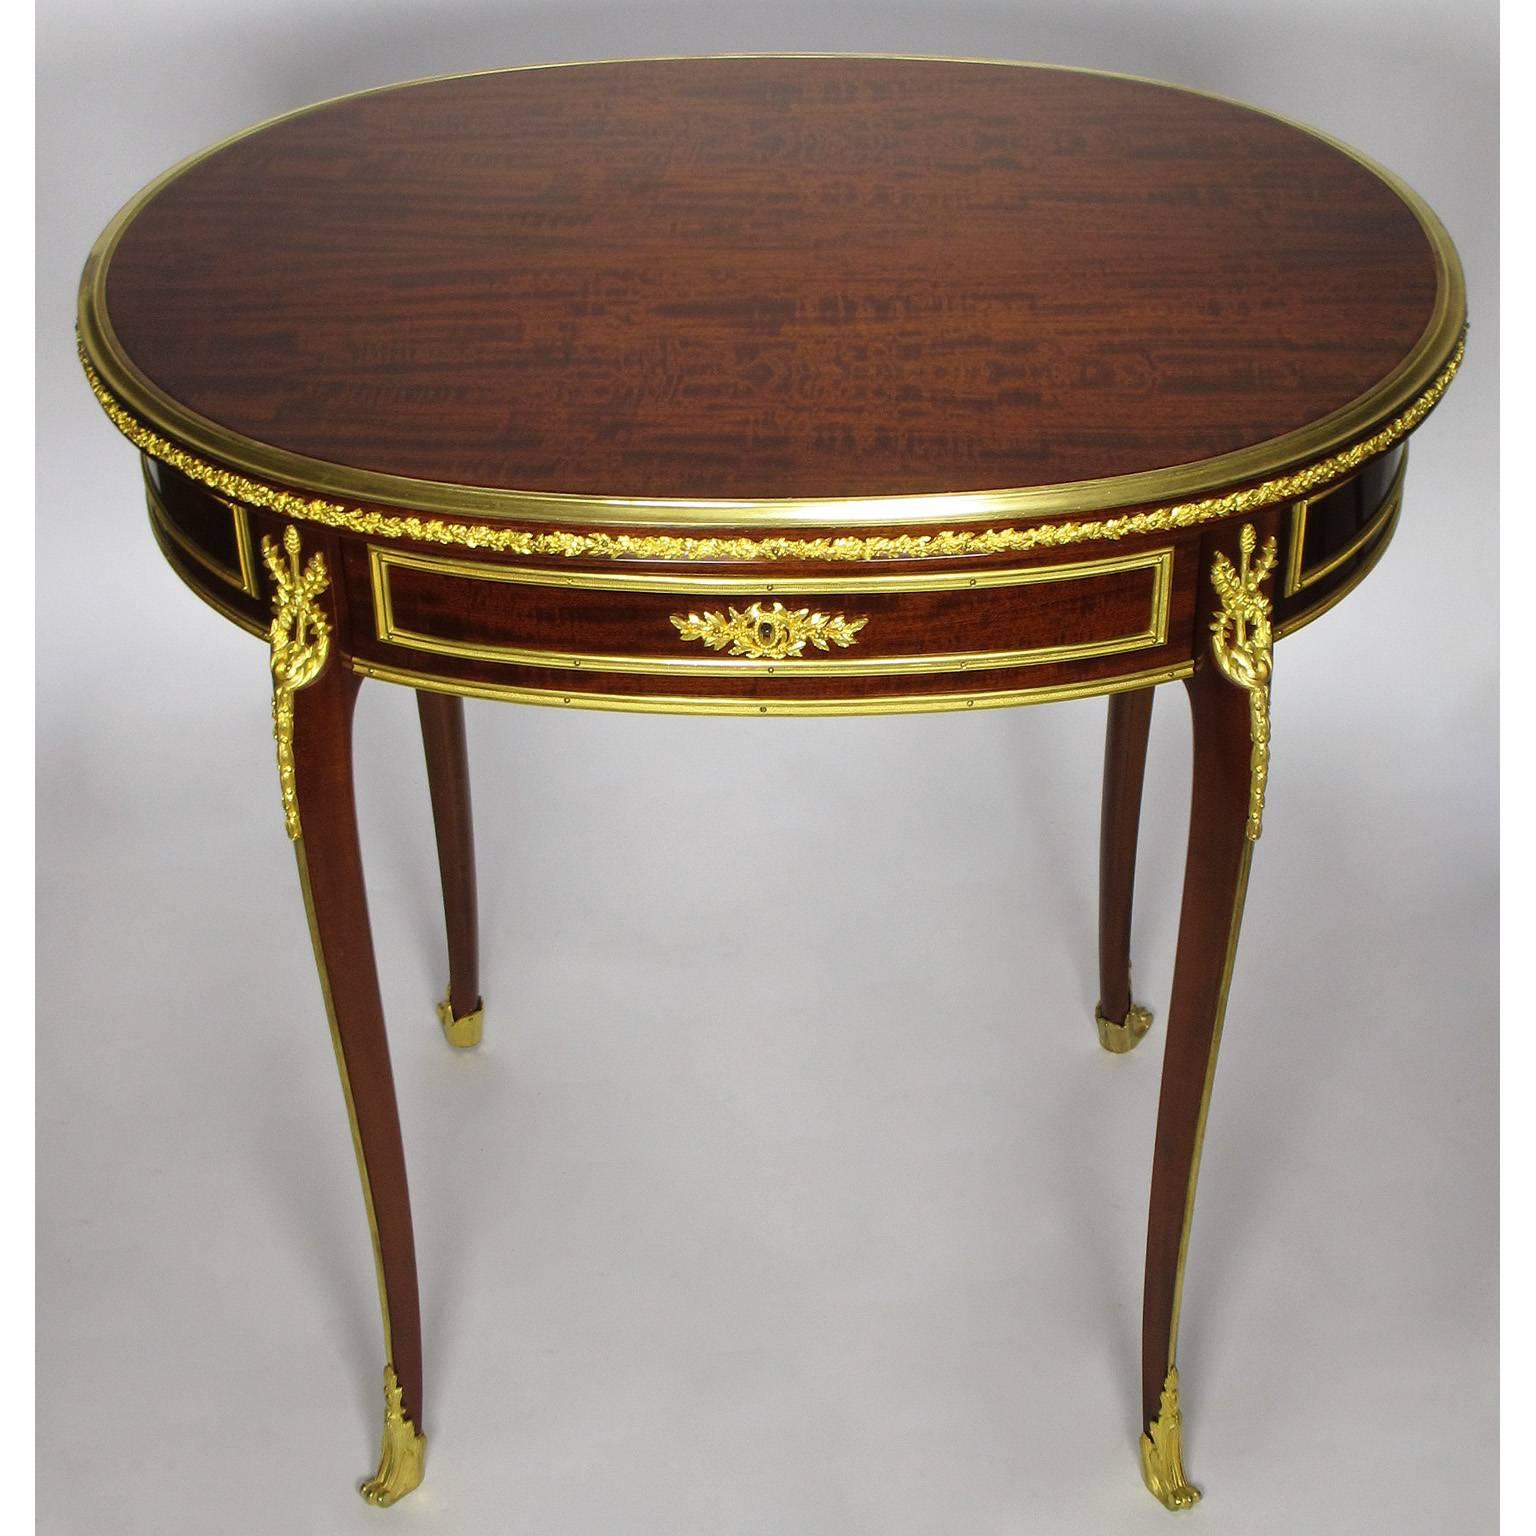 A fine French 19th century Louis XV style ormolu-mounted mahogany single-drawer oval gueridon table attributed to Paul Sormani (1817-1877). The lockpate inscribed: Sormani - PARIS, 134 Bd Haussmann, Paris, circa third quarter of the 19th